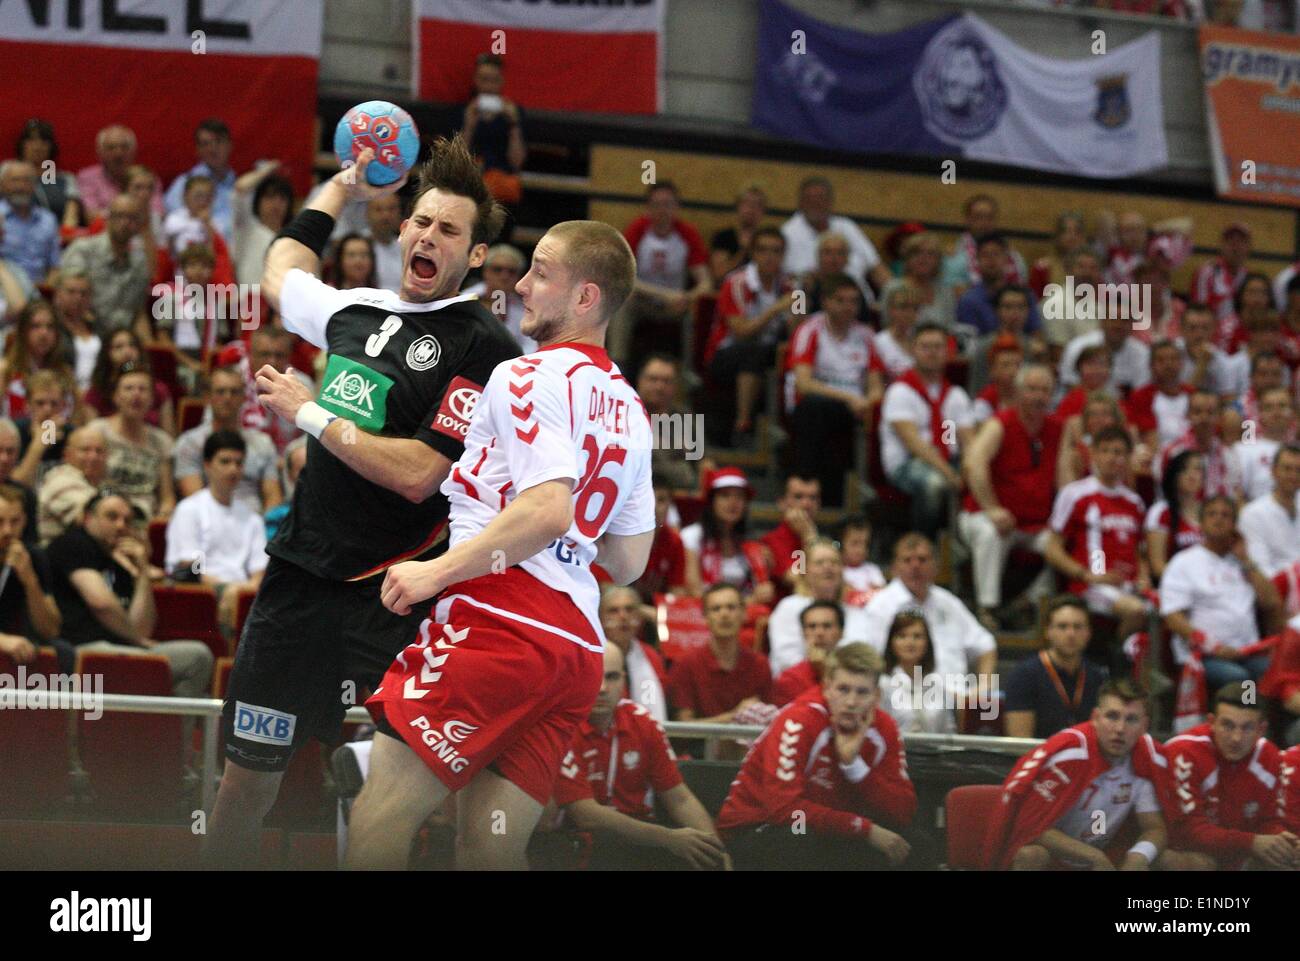 Gdansk, Poland 7th, June 2014 Quatar 2015 Men's World Handball Championship Play Off game between Poland and Germany at ERGO Arena sports hall. Uwe Gansheimer (3) in action during the game. Credit:  Michal Fludra/Alamy Live News Stock Photo